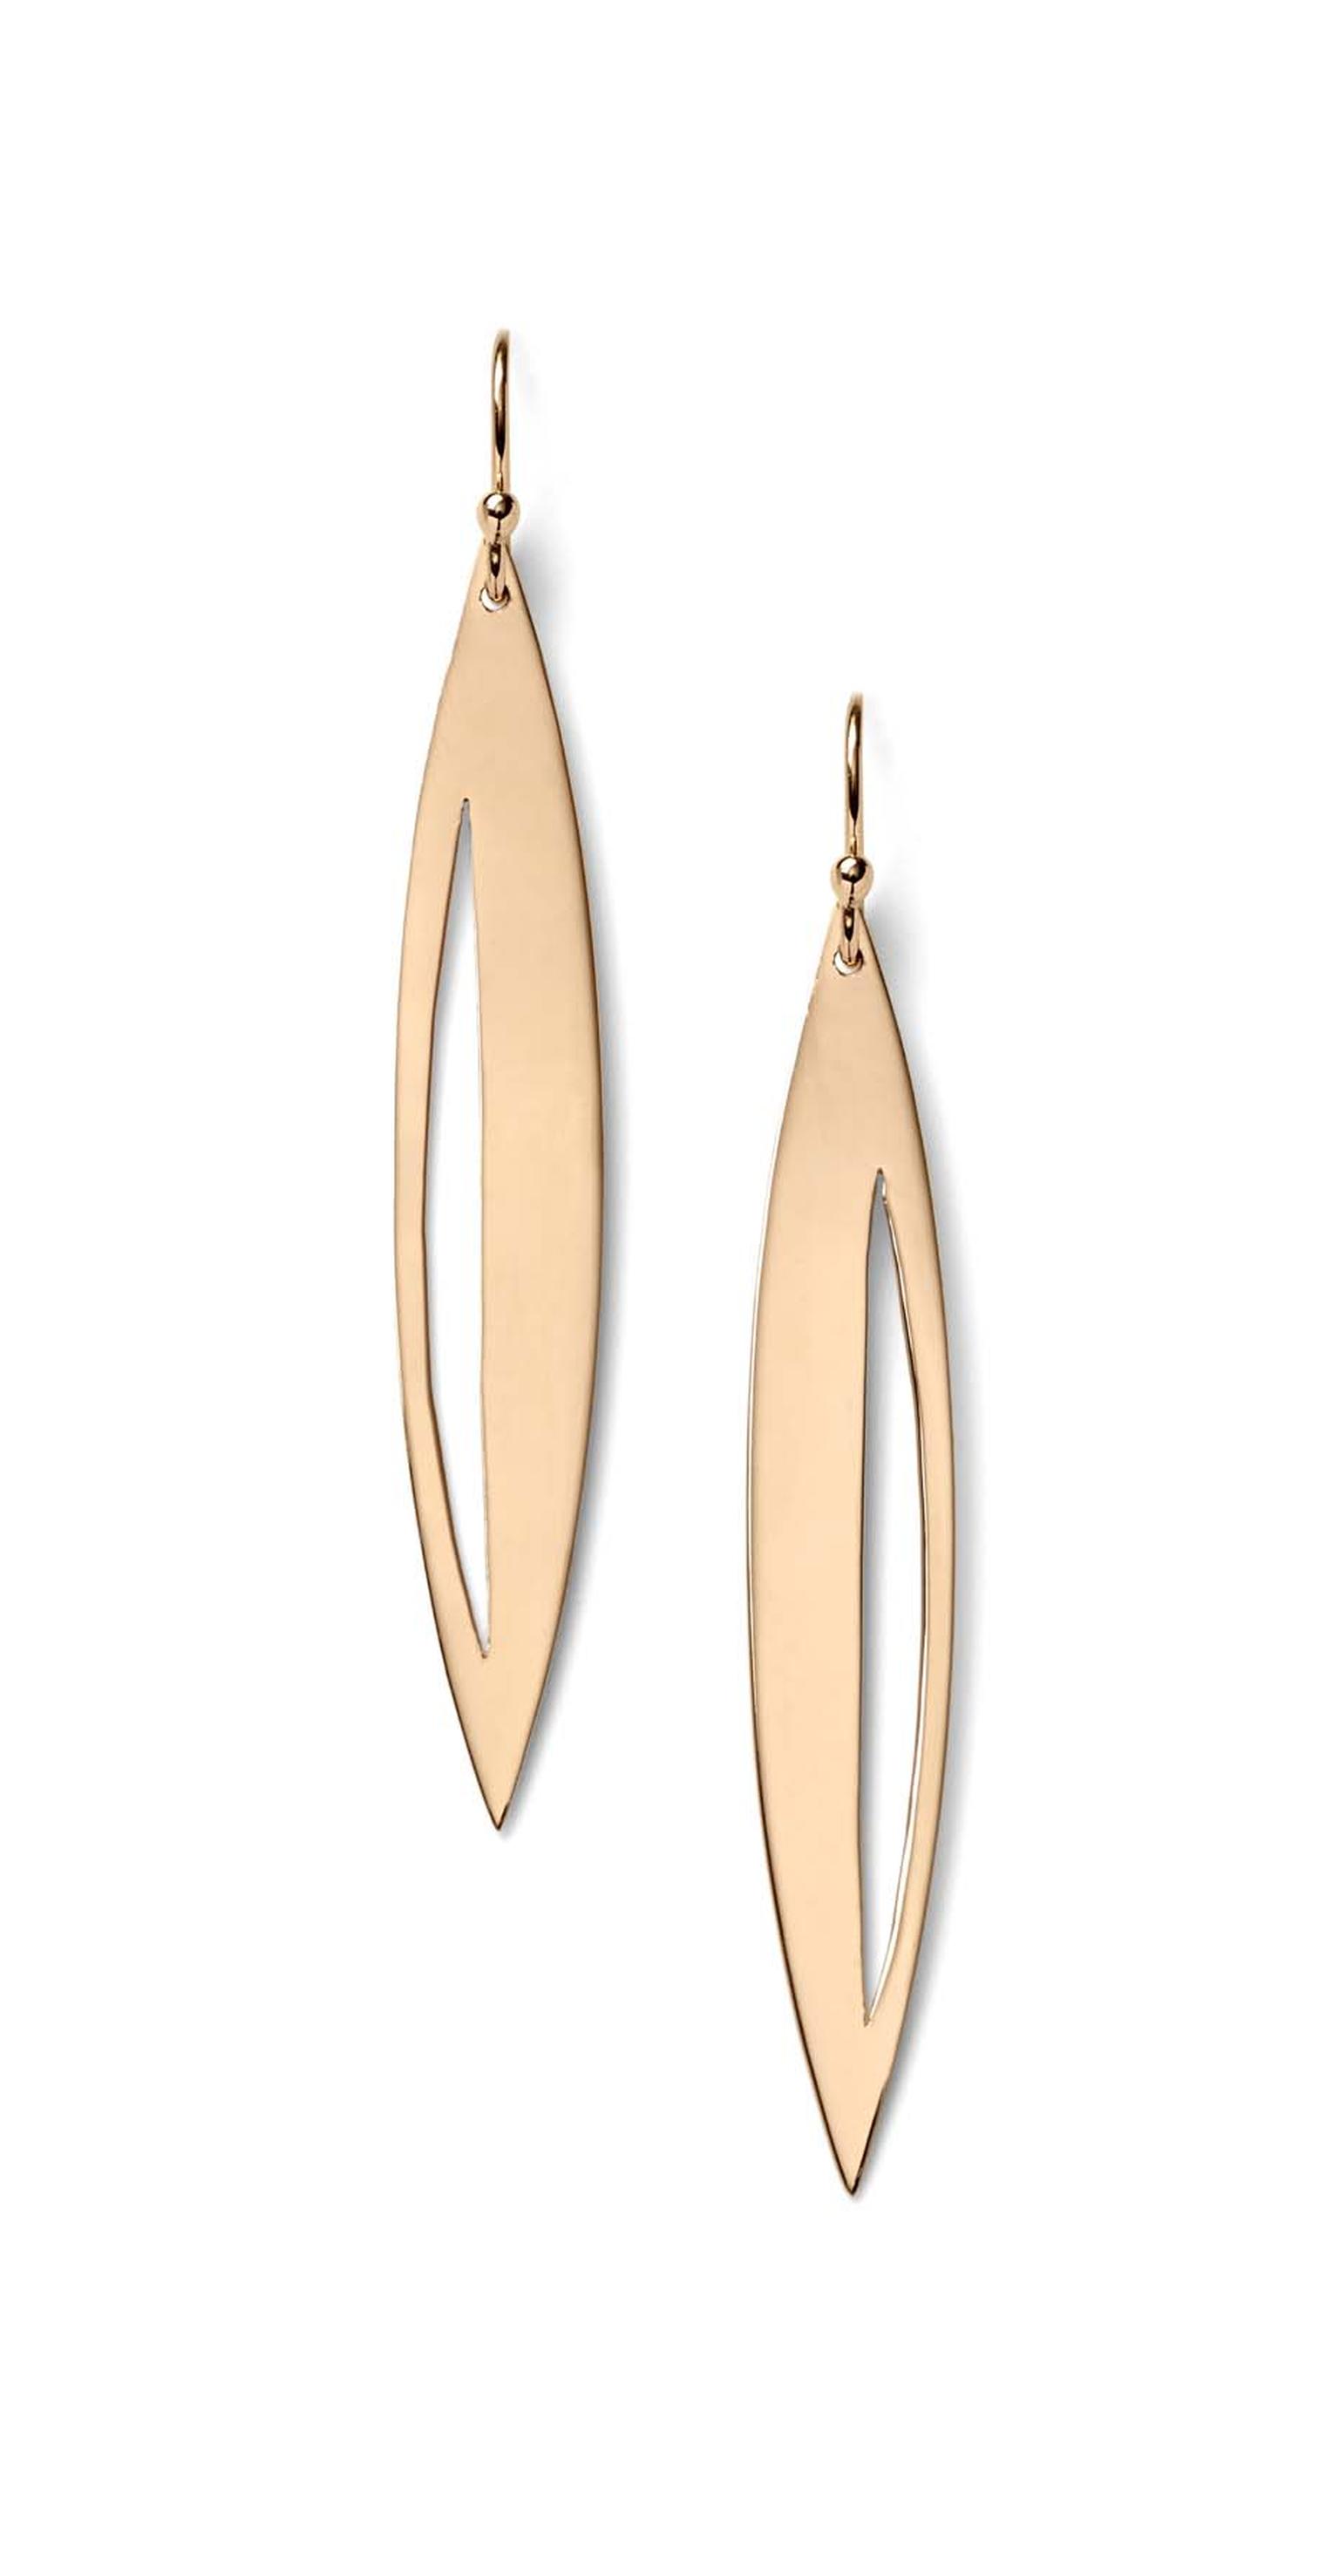 Monique Péan Navette earrings in gold, from the Seto collection.